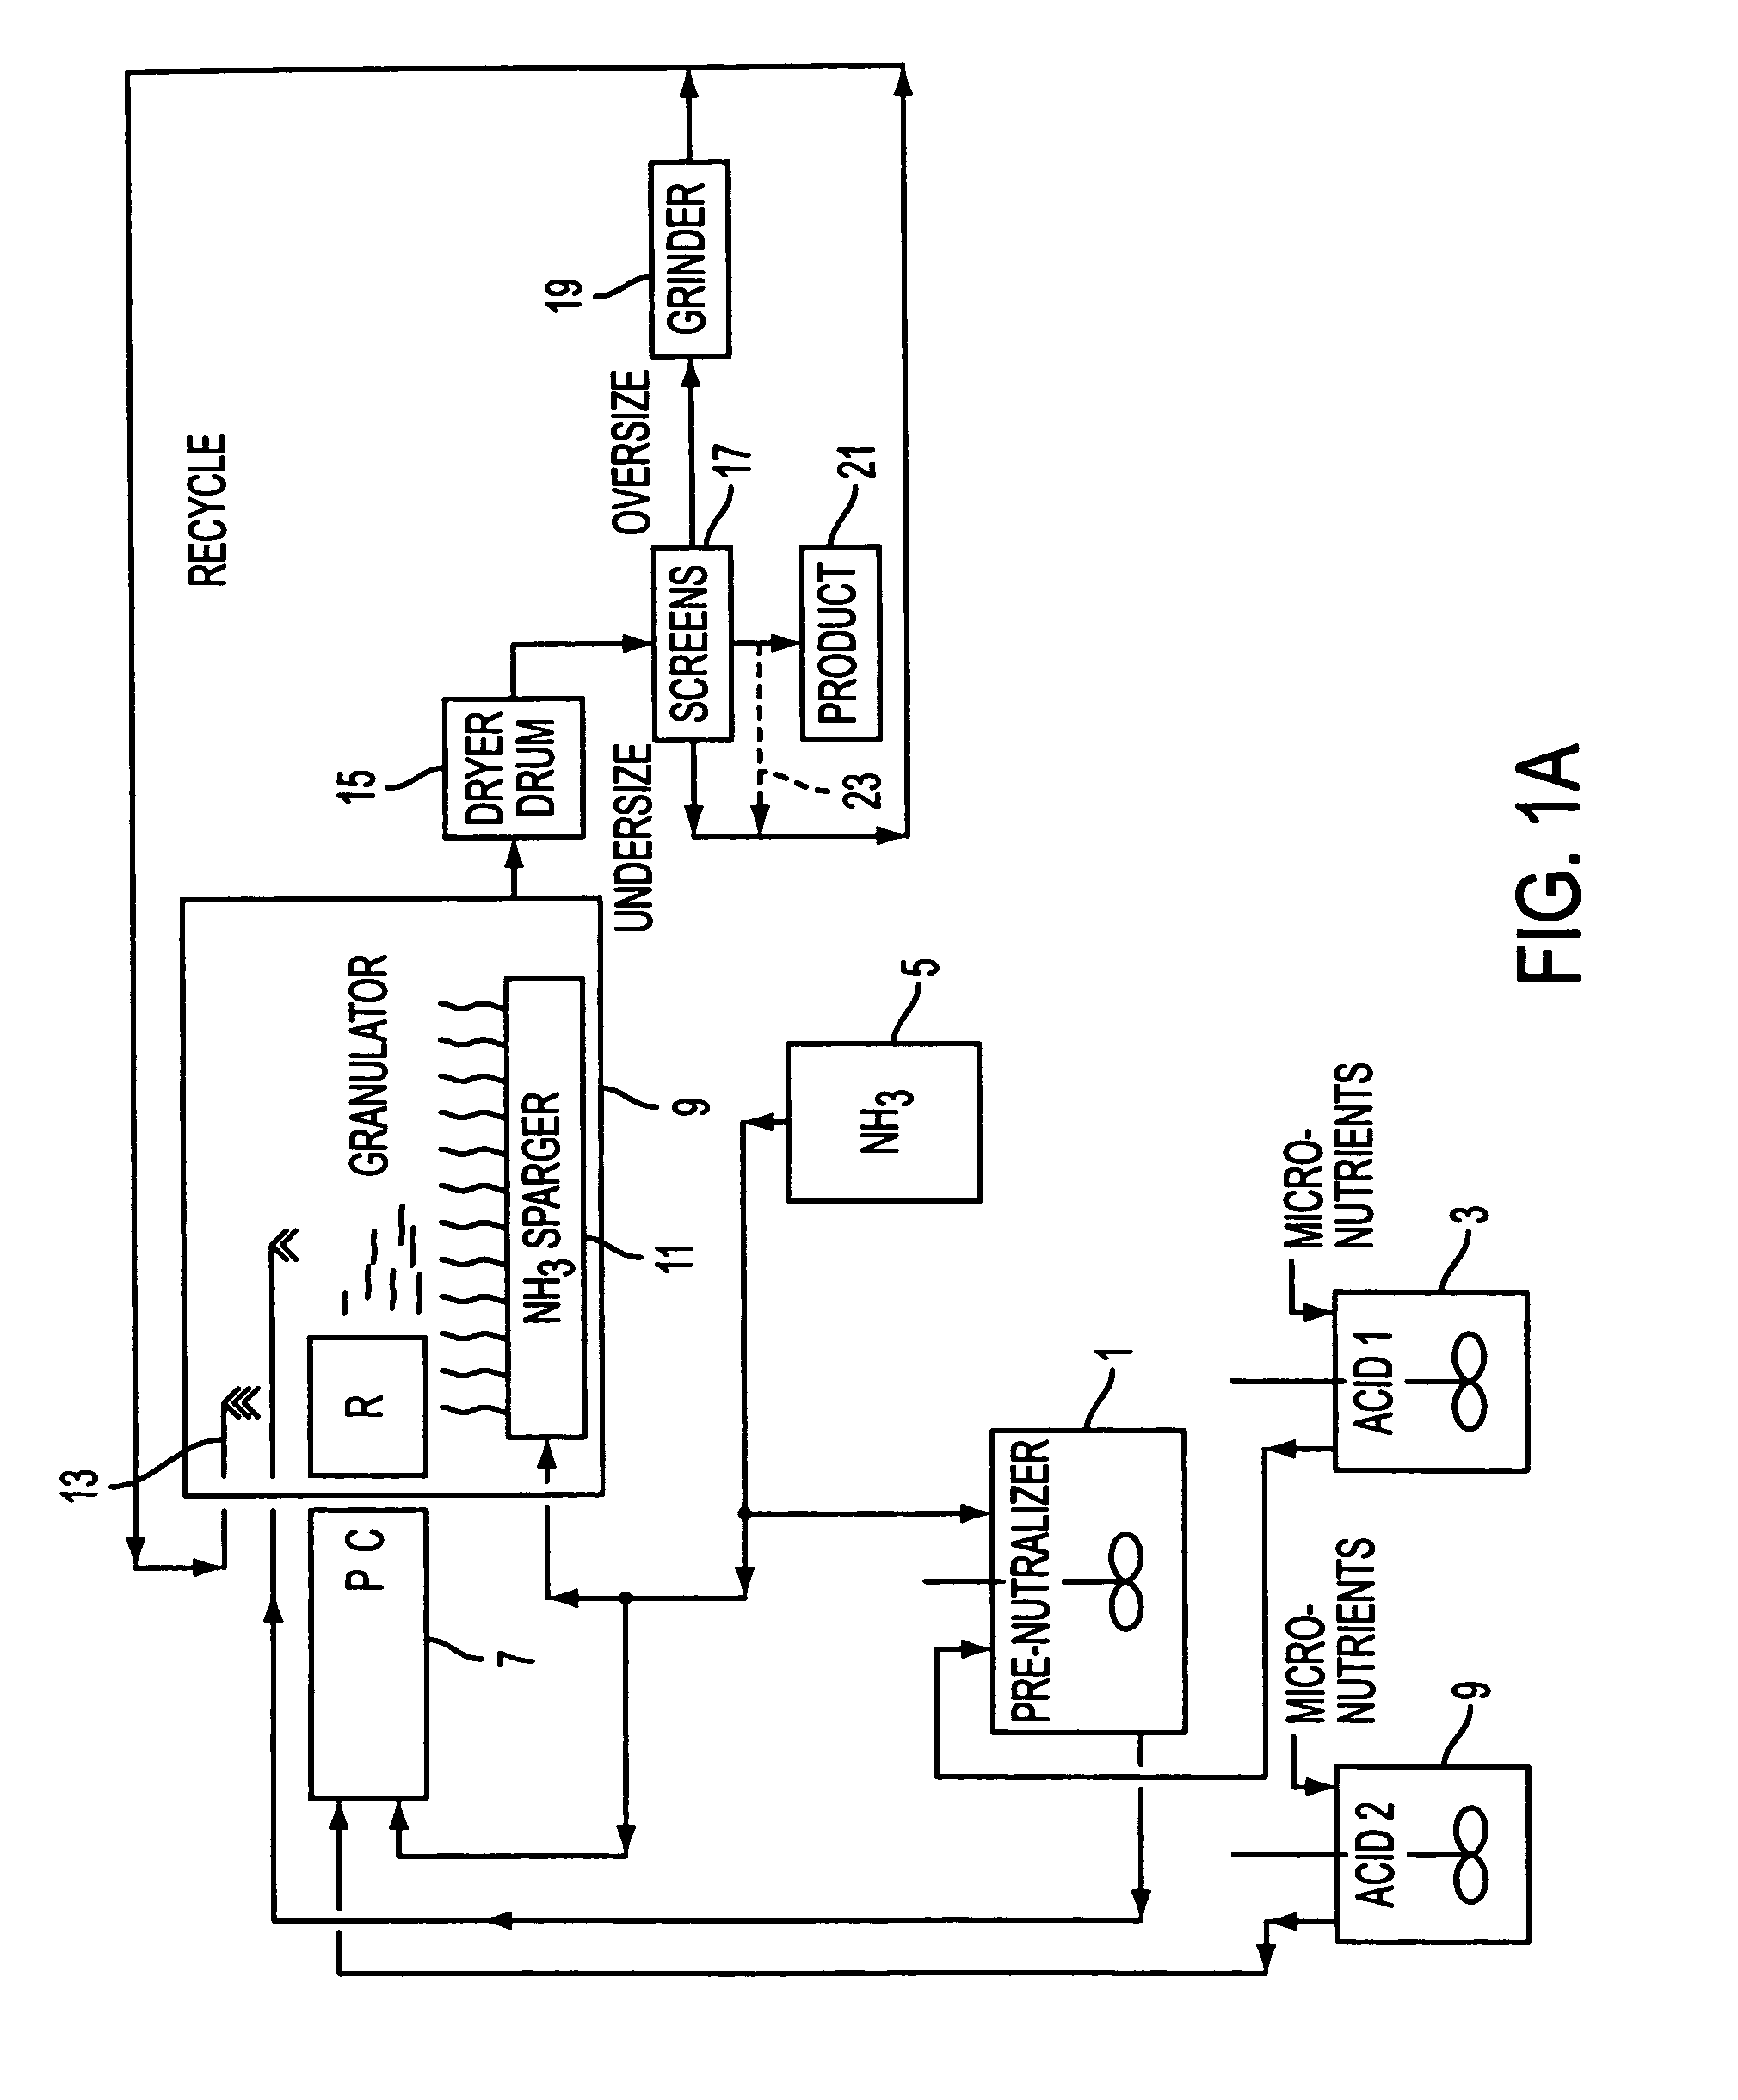 Method for producing a fertilizer with micronutrients